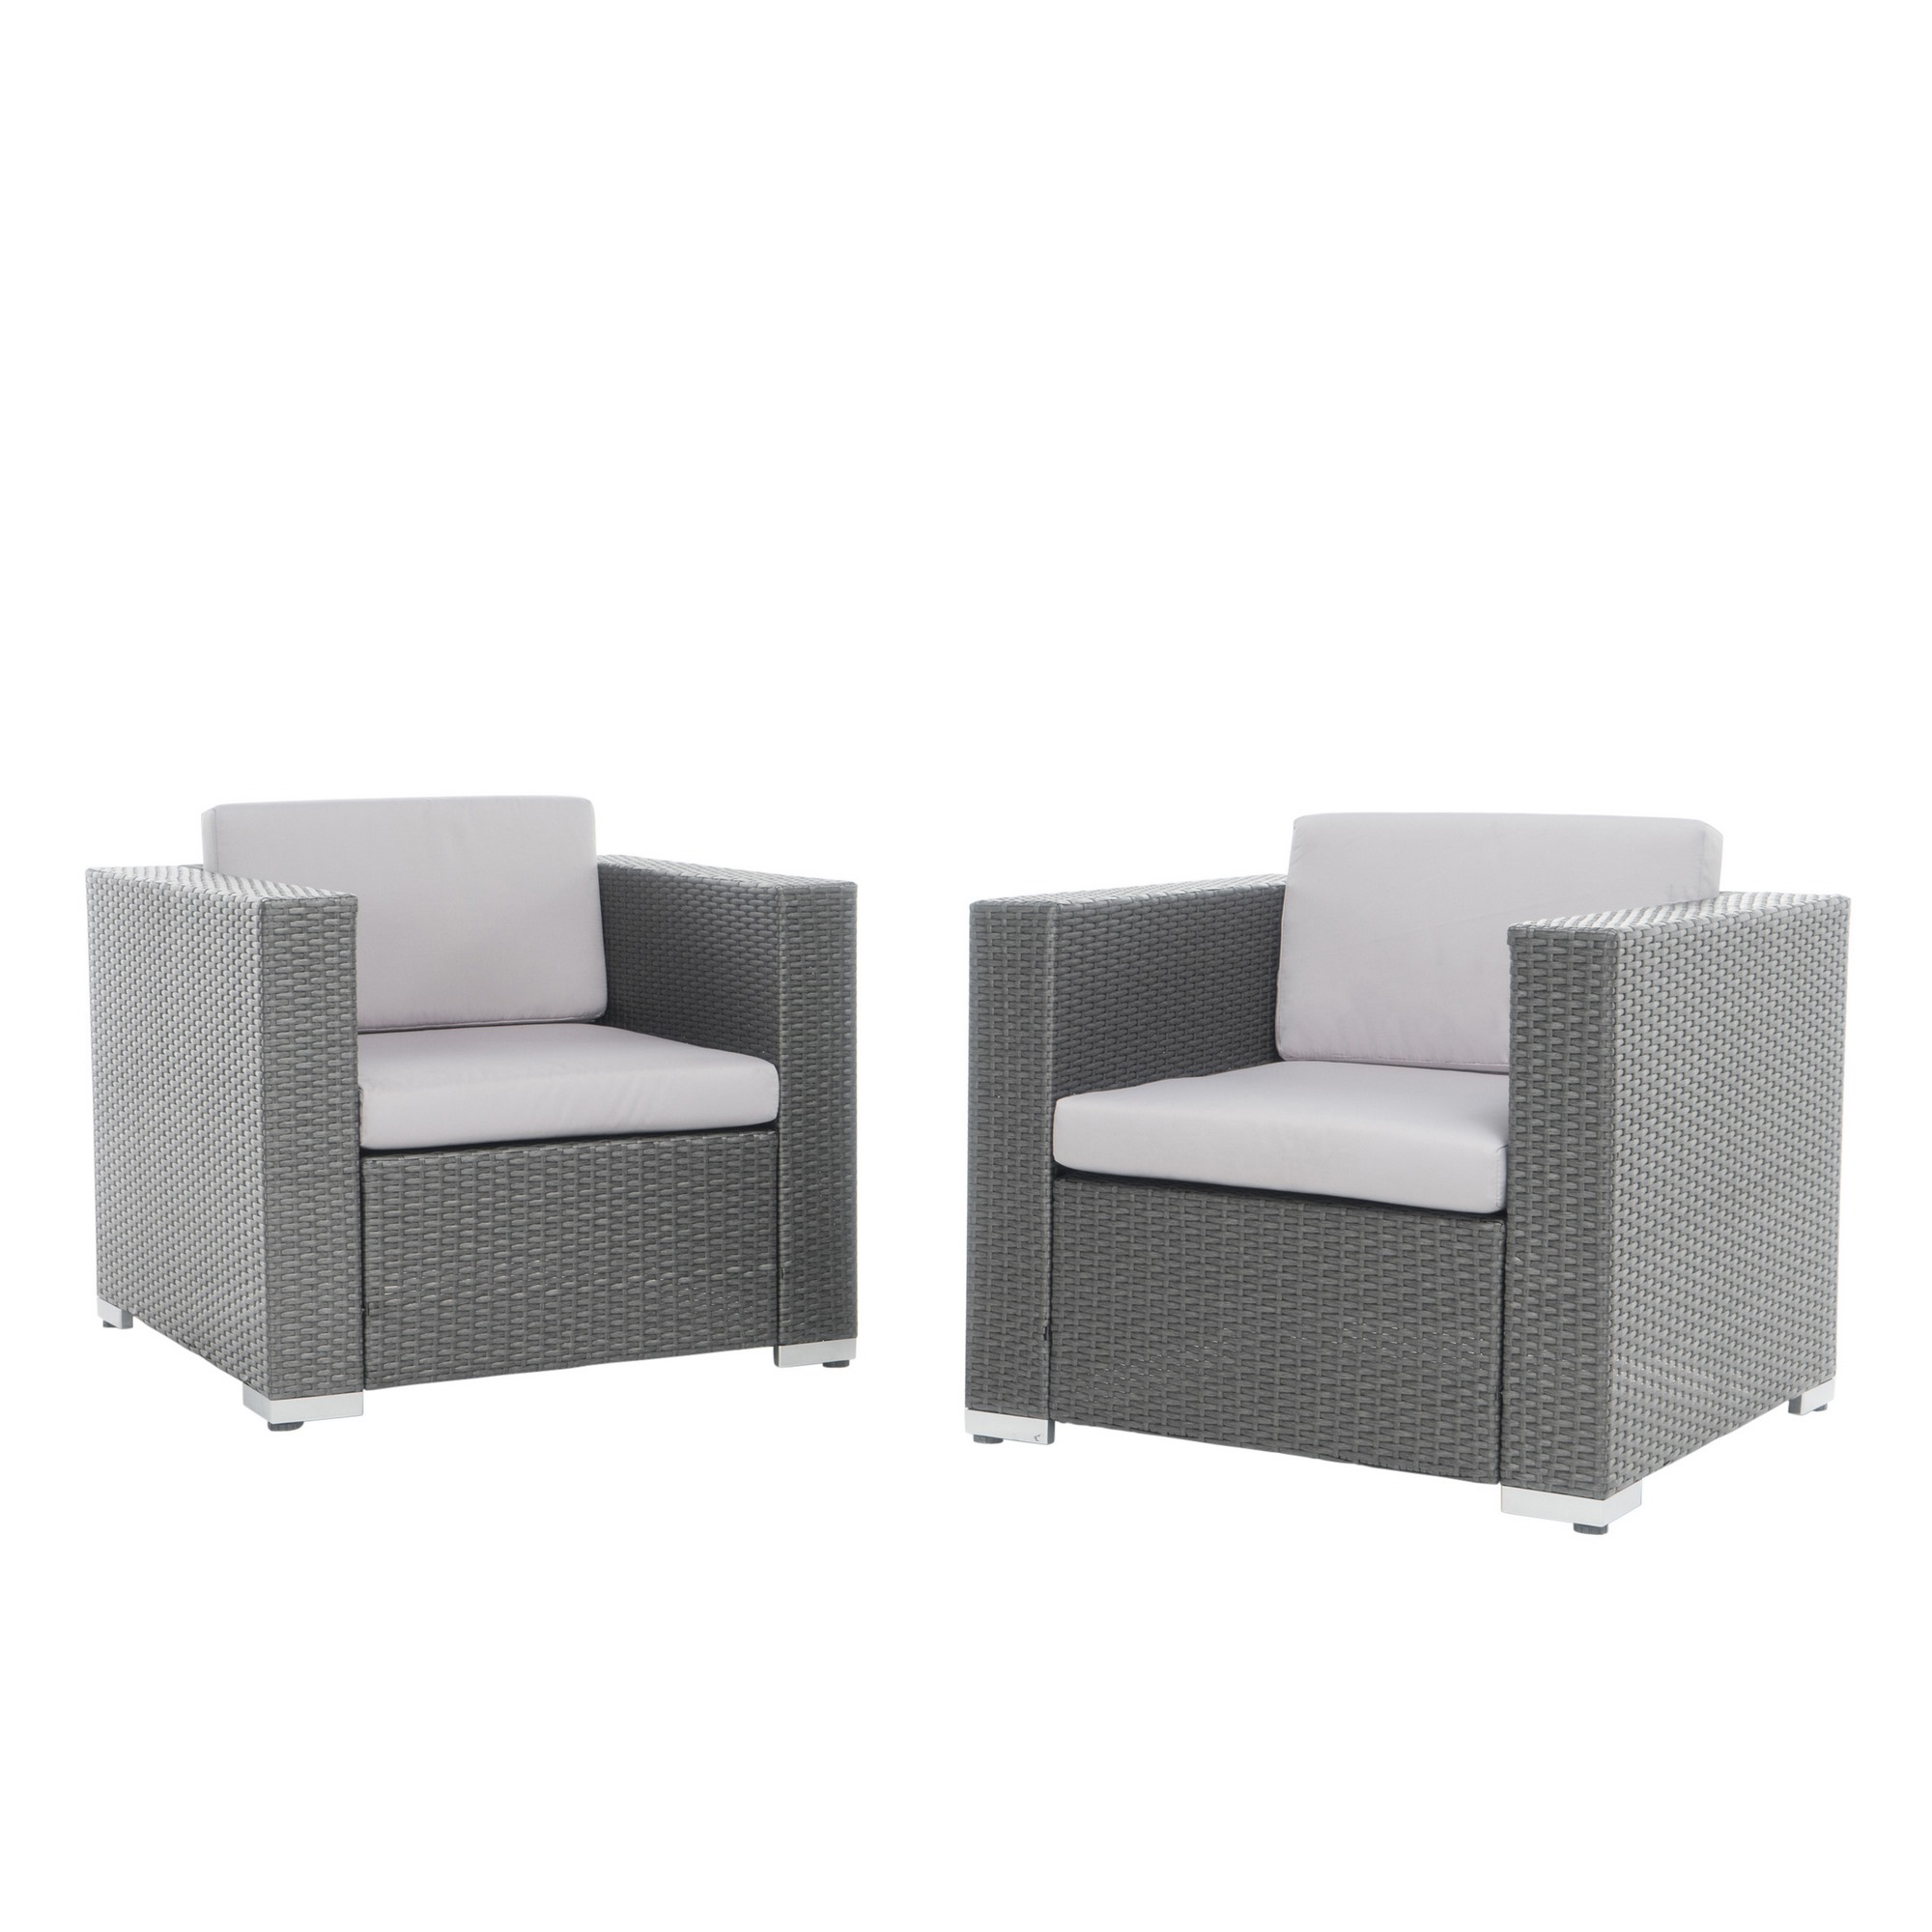 Murano Outdoor Grey Wicker Club hair with Silver Water Resistant Fabric  Cushions (Set of 2)